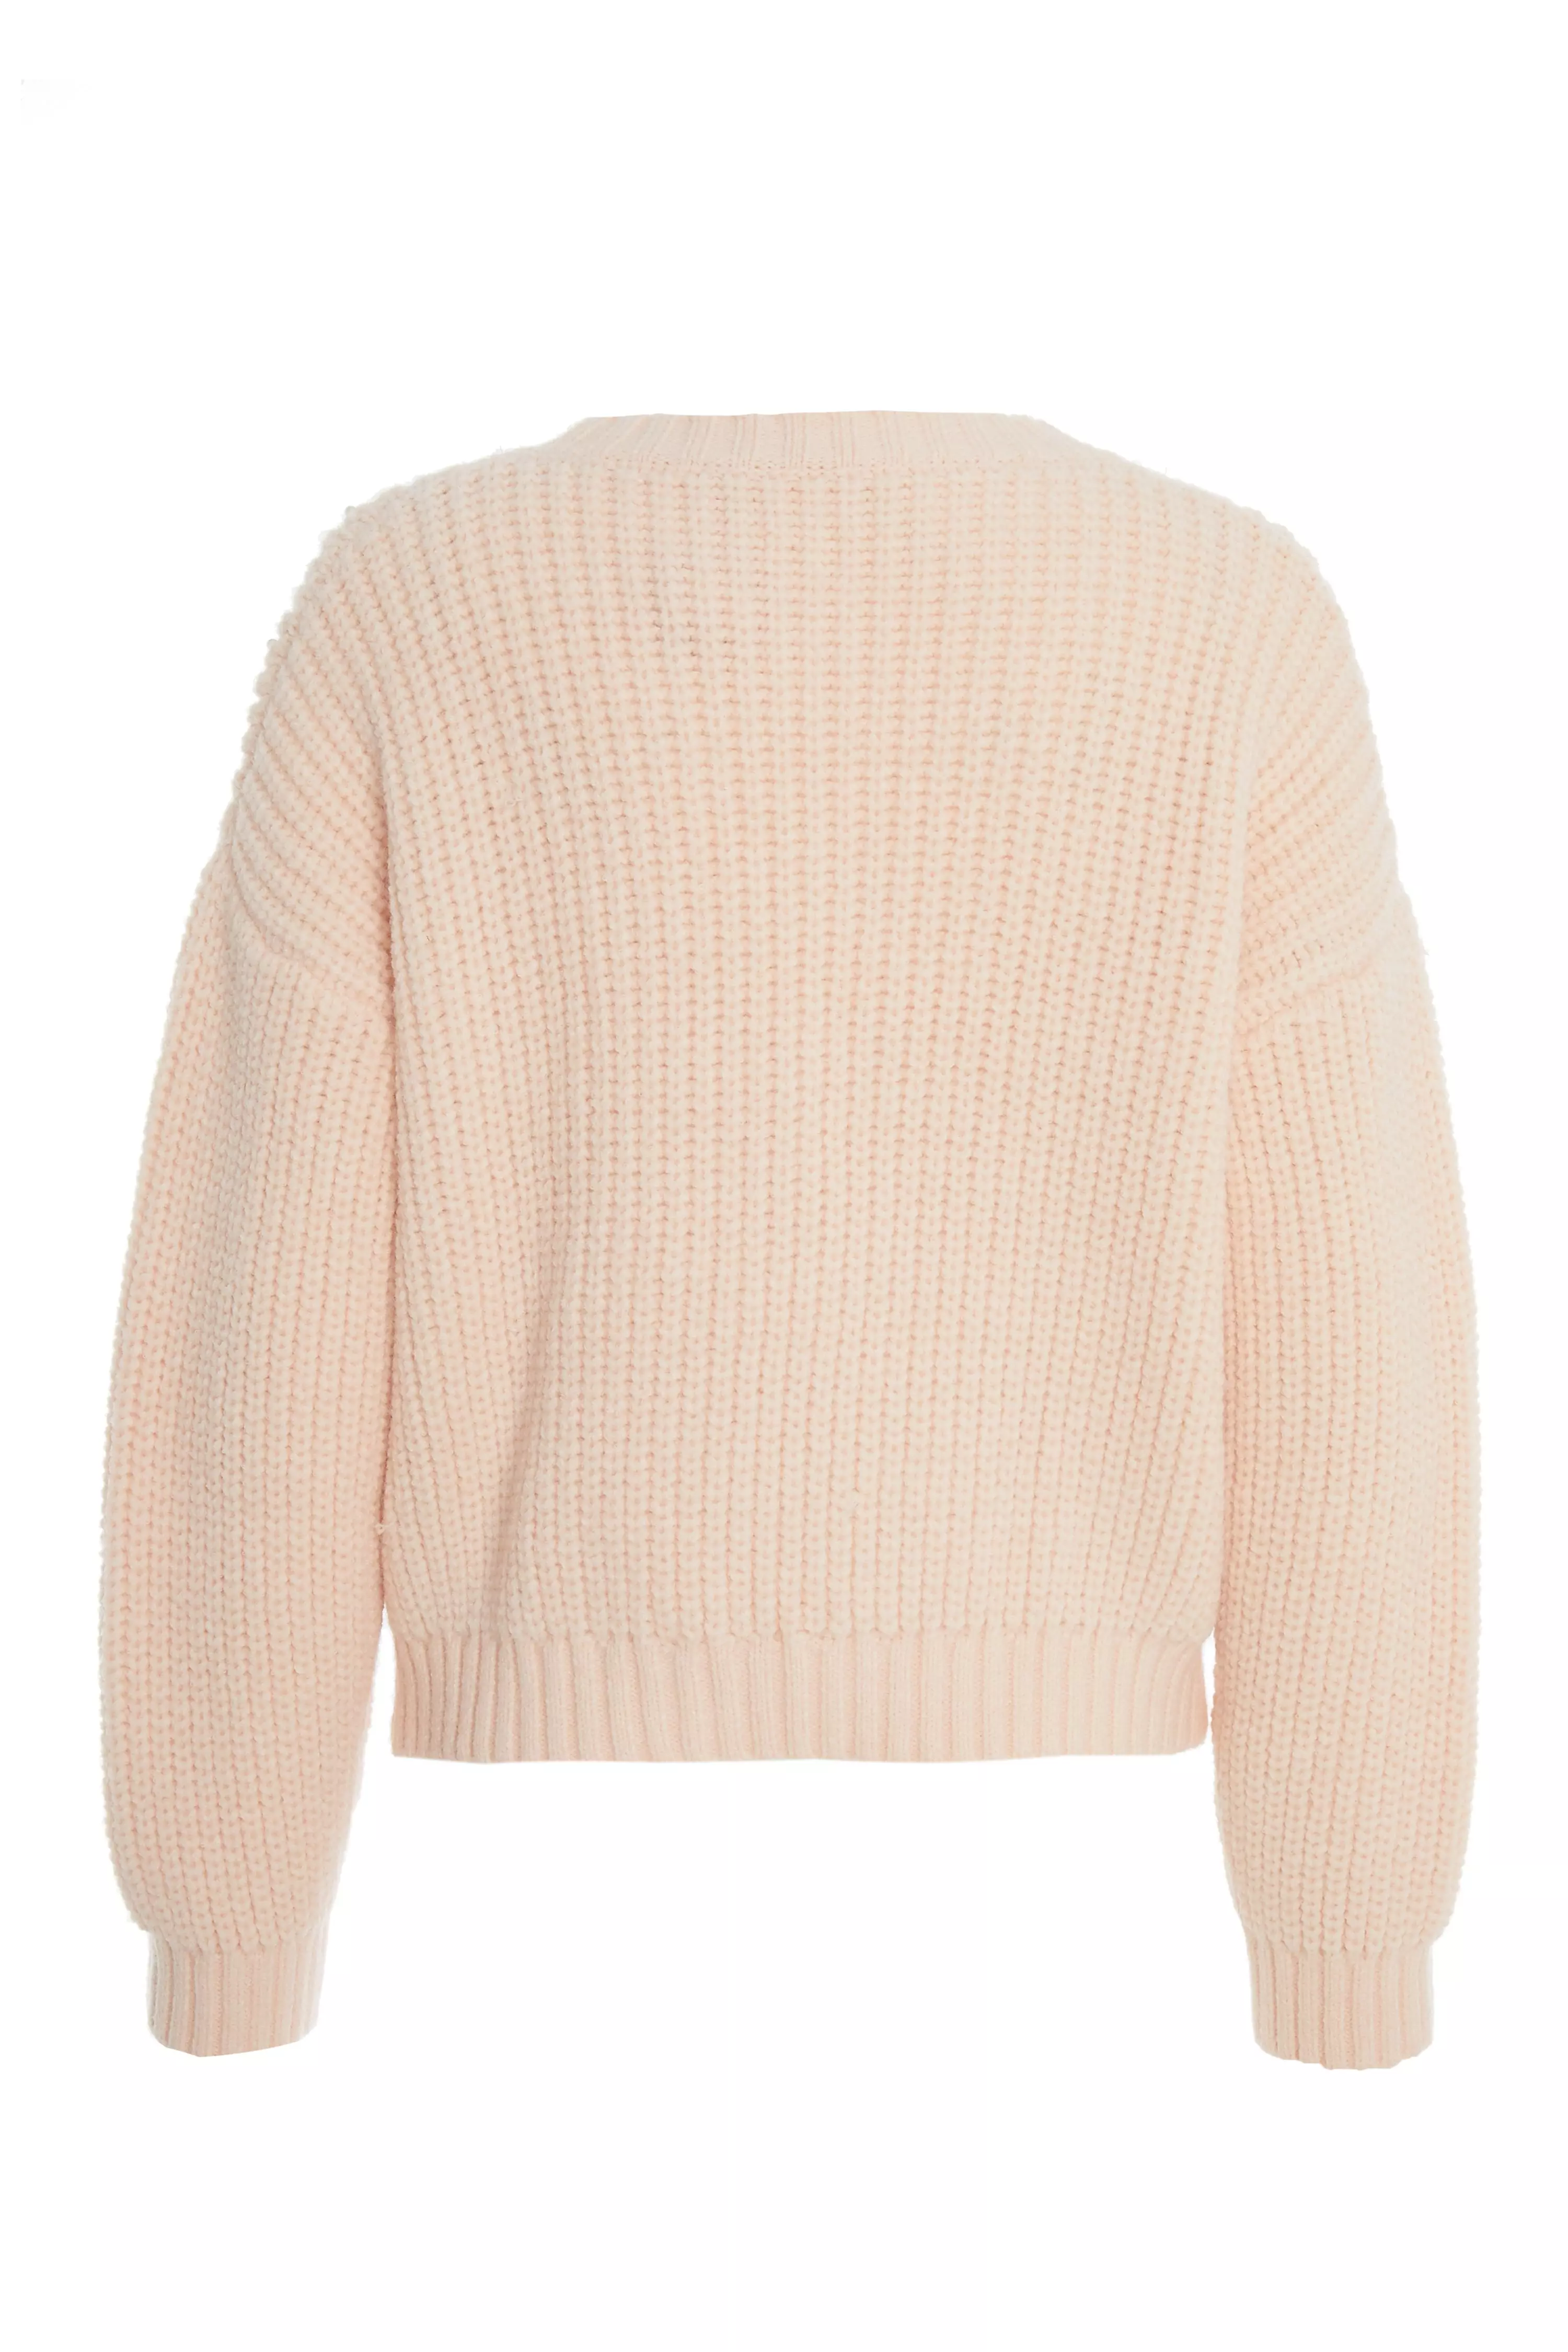 Pale Pink Cable Knit Jumper